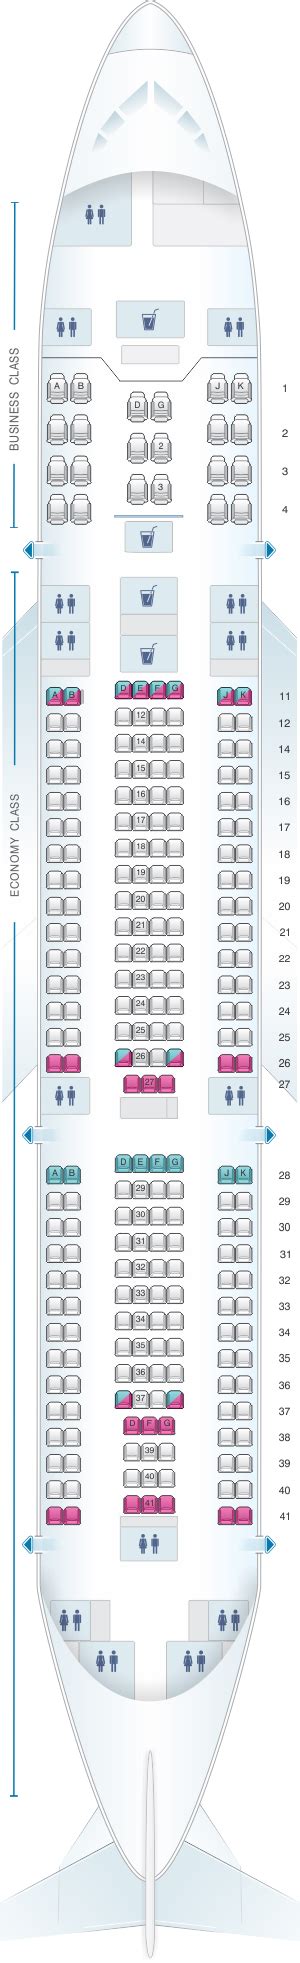 Bank Fifth Cool Turkish Airlines Seating Map Accustomed To Third Car